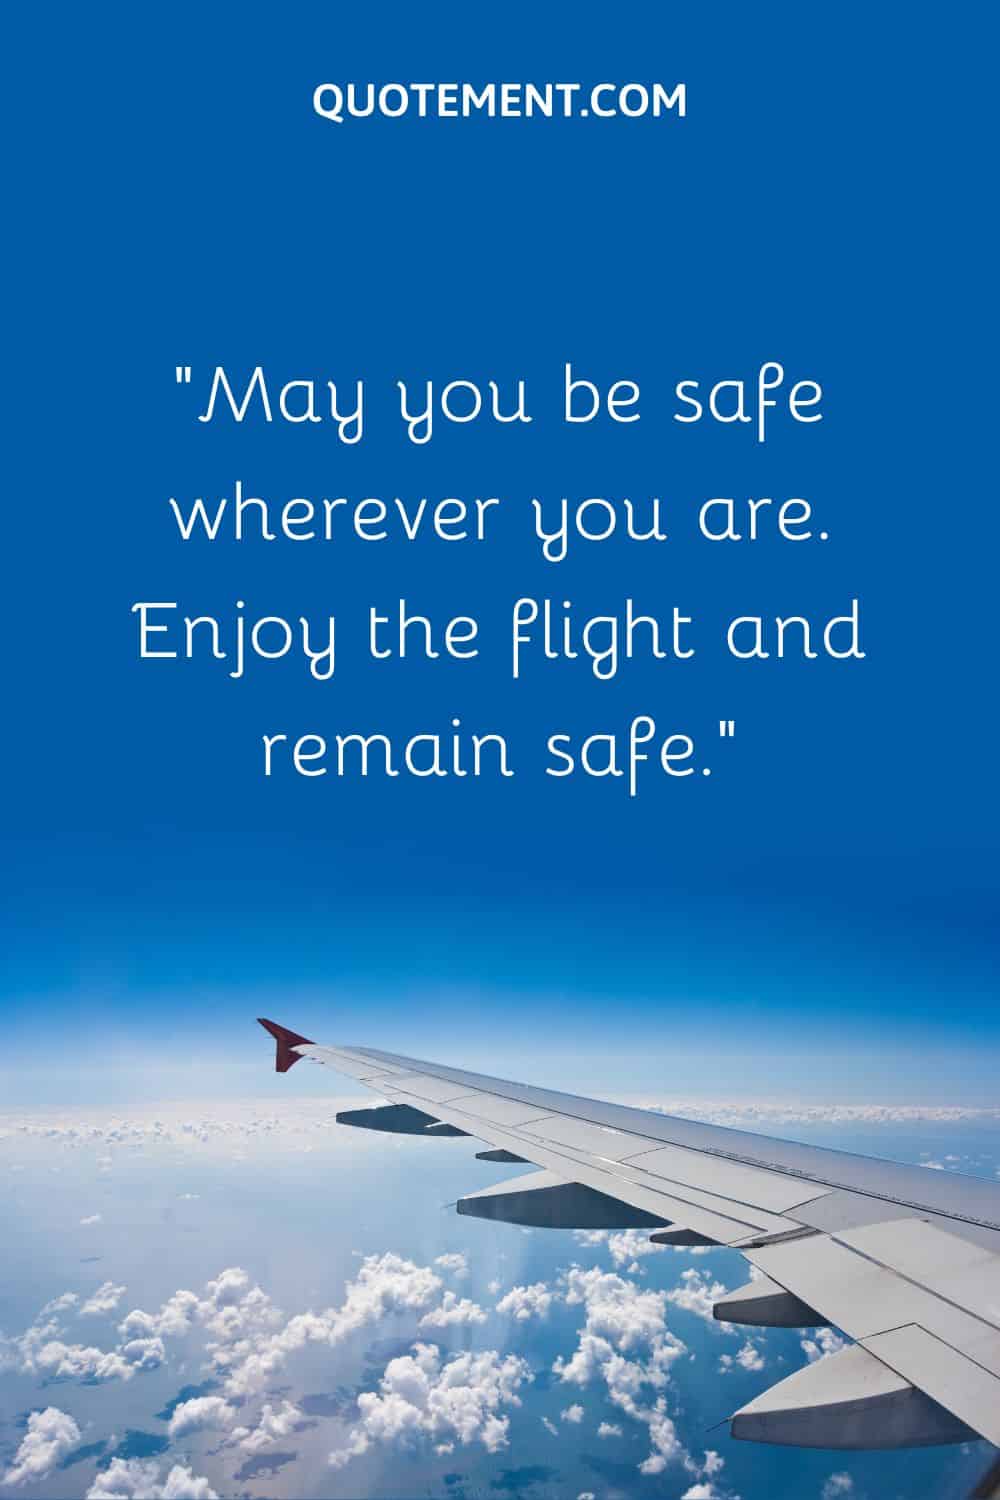 May you be safe wherever you are.